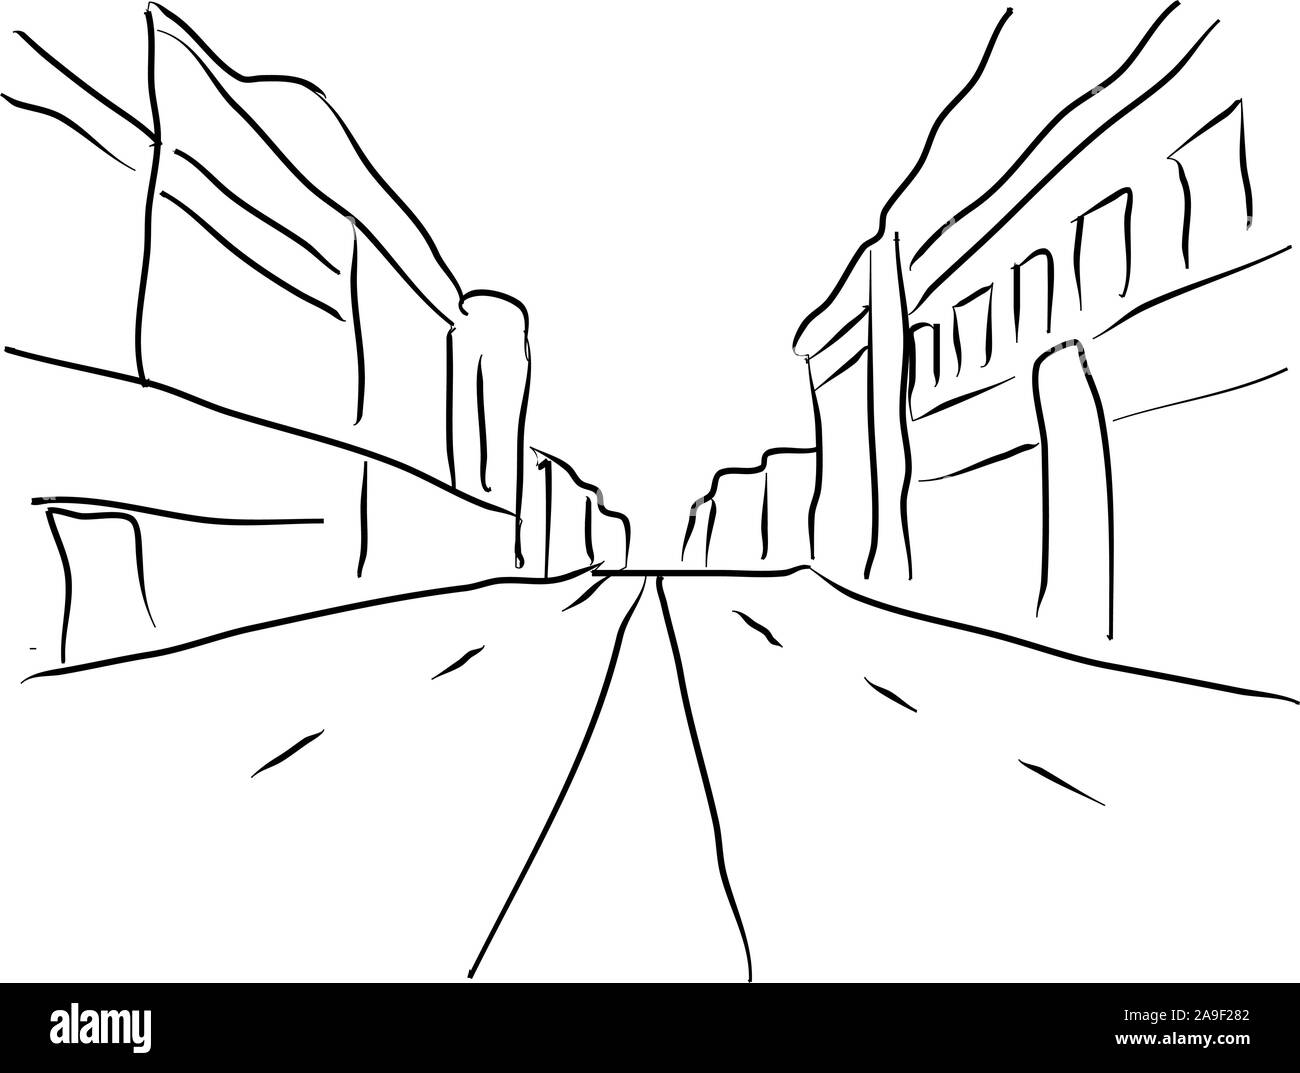 Sketch illustration, street, road. Flat style. Urban architecture, city graphic. Vintage design Stock Vector